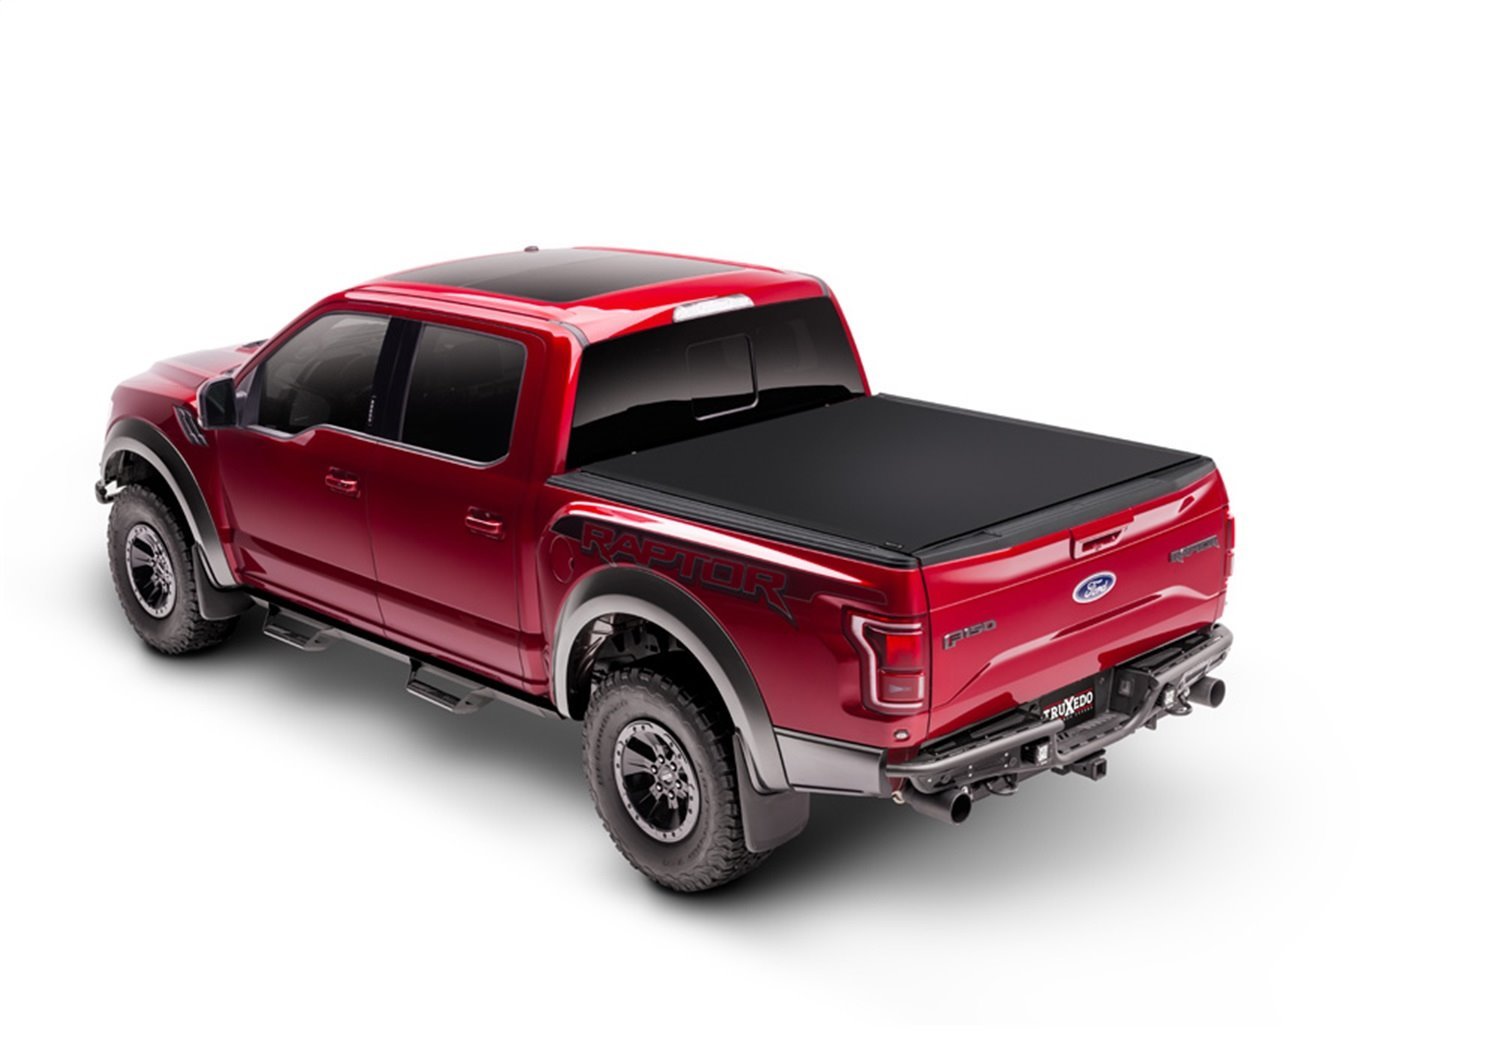 1594716 Sentry CT Hard Roll-Up Tonneau Cover Fits Select Ford Mavericks w/4 ft. 4 in. Bed [Matte Black]